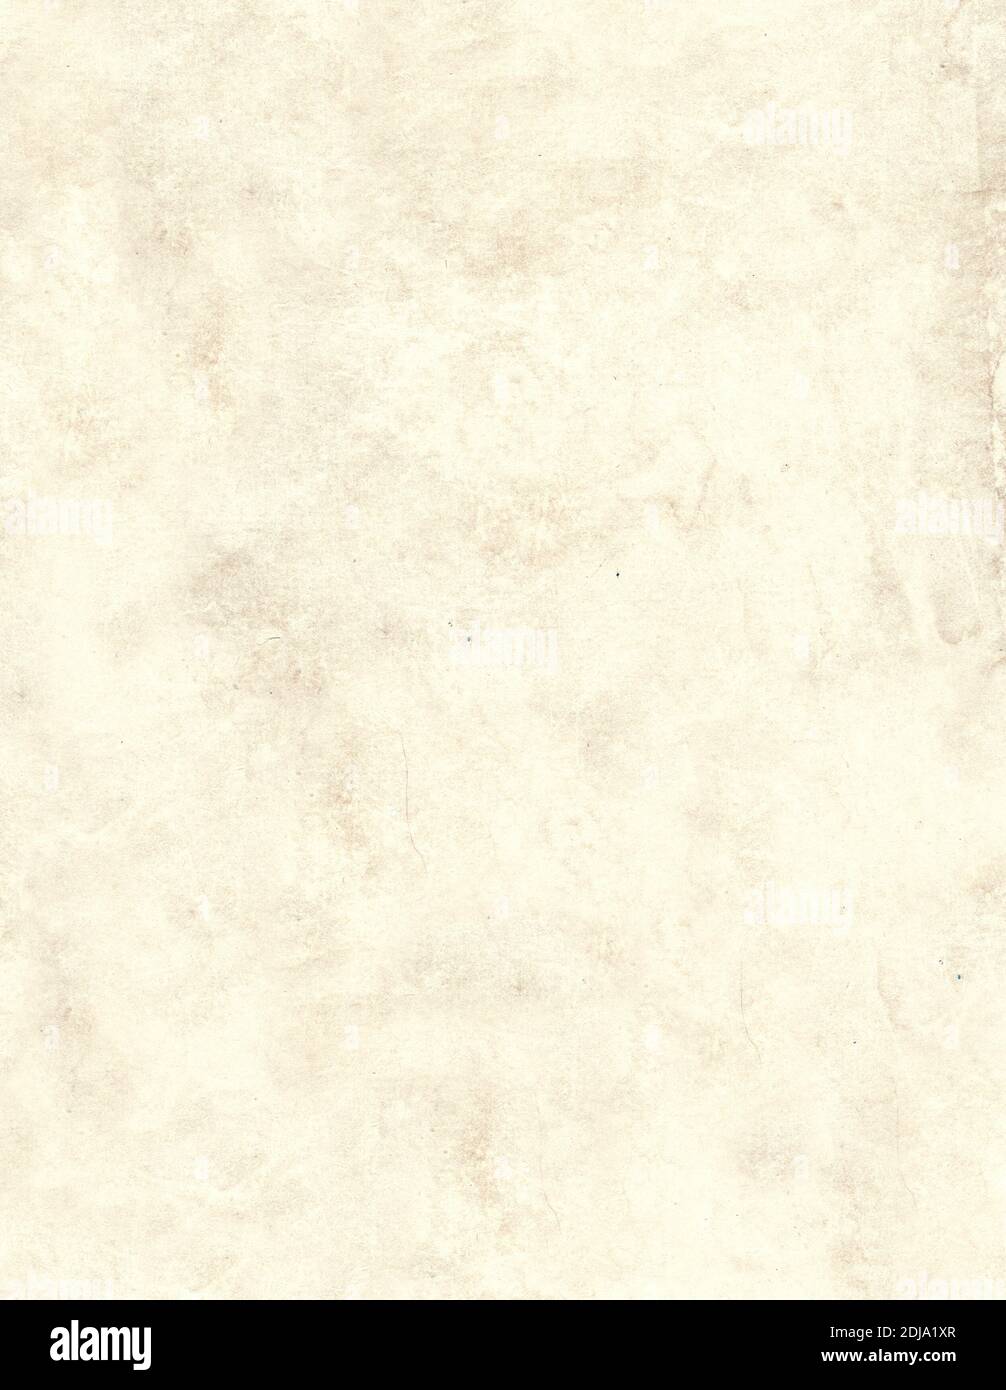 Background with grunge texture of the old, soiled paper. Vertical backdrop  with paper texture of beige color Stock Photo - Alamy